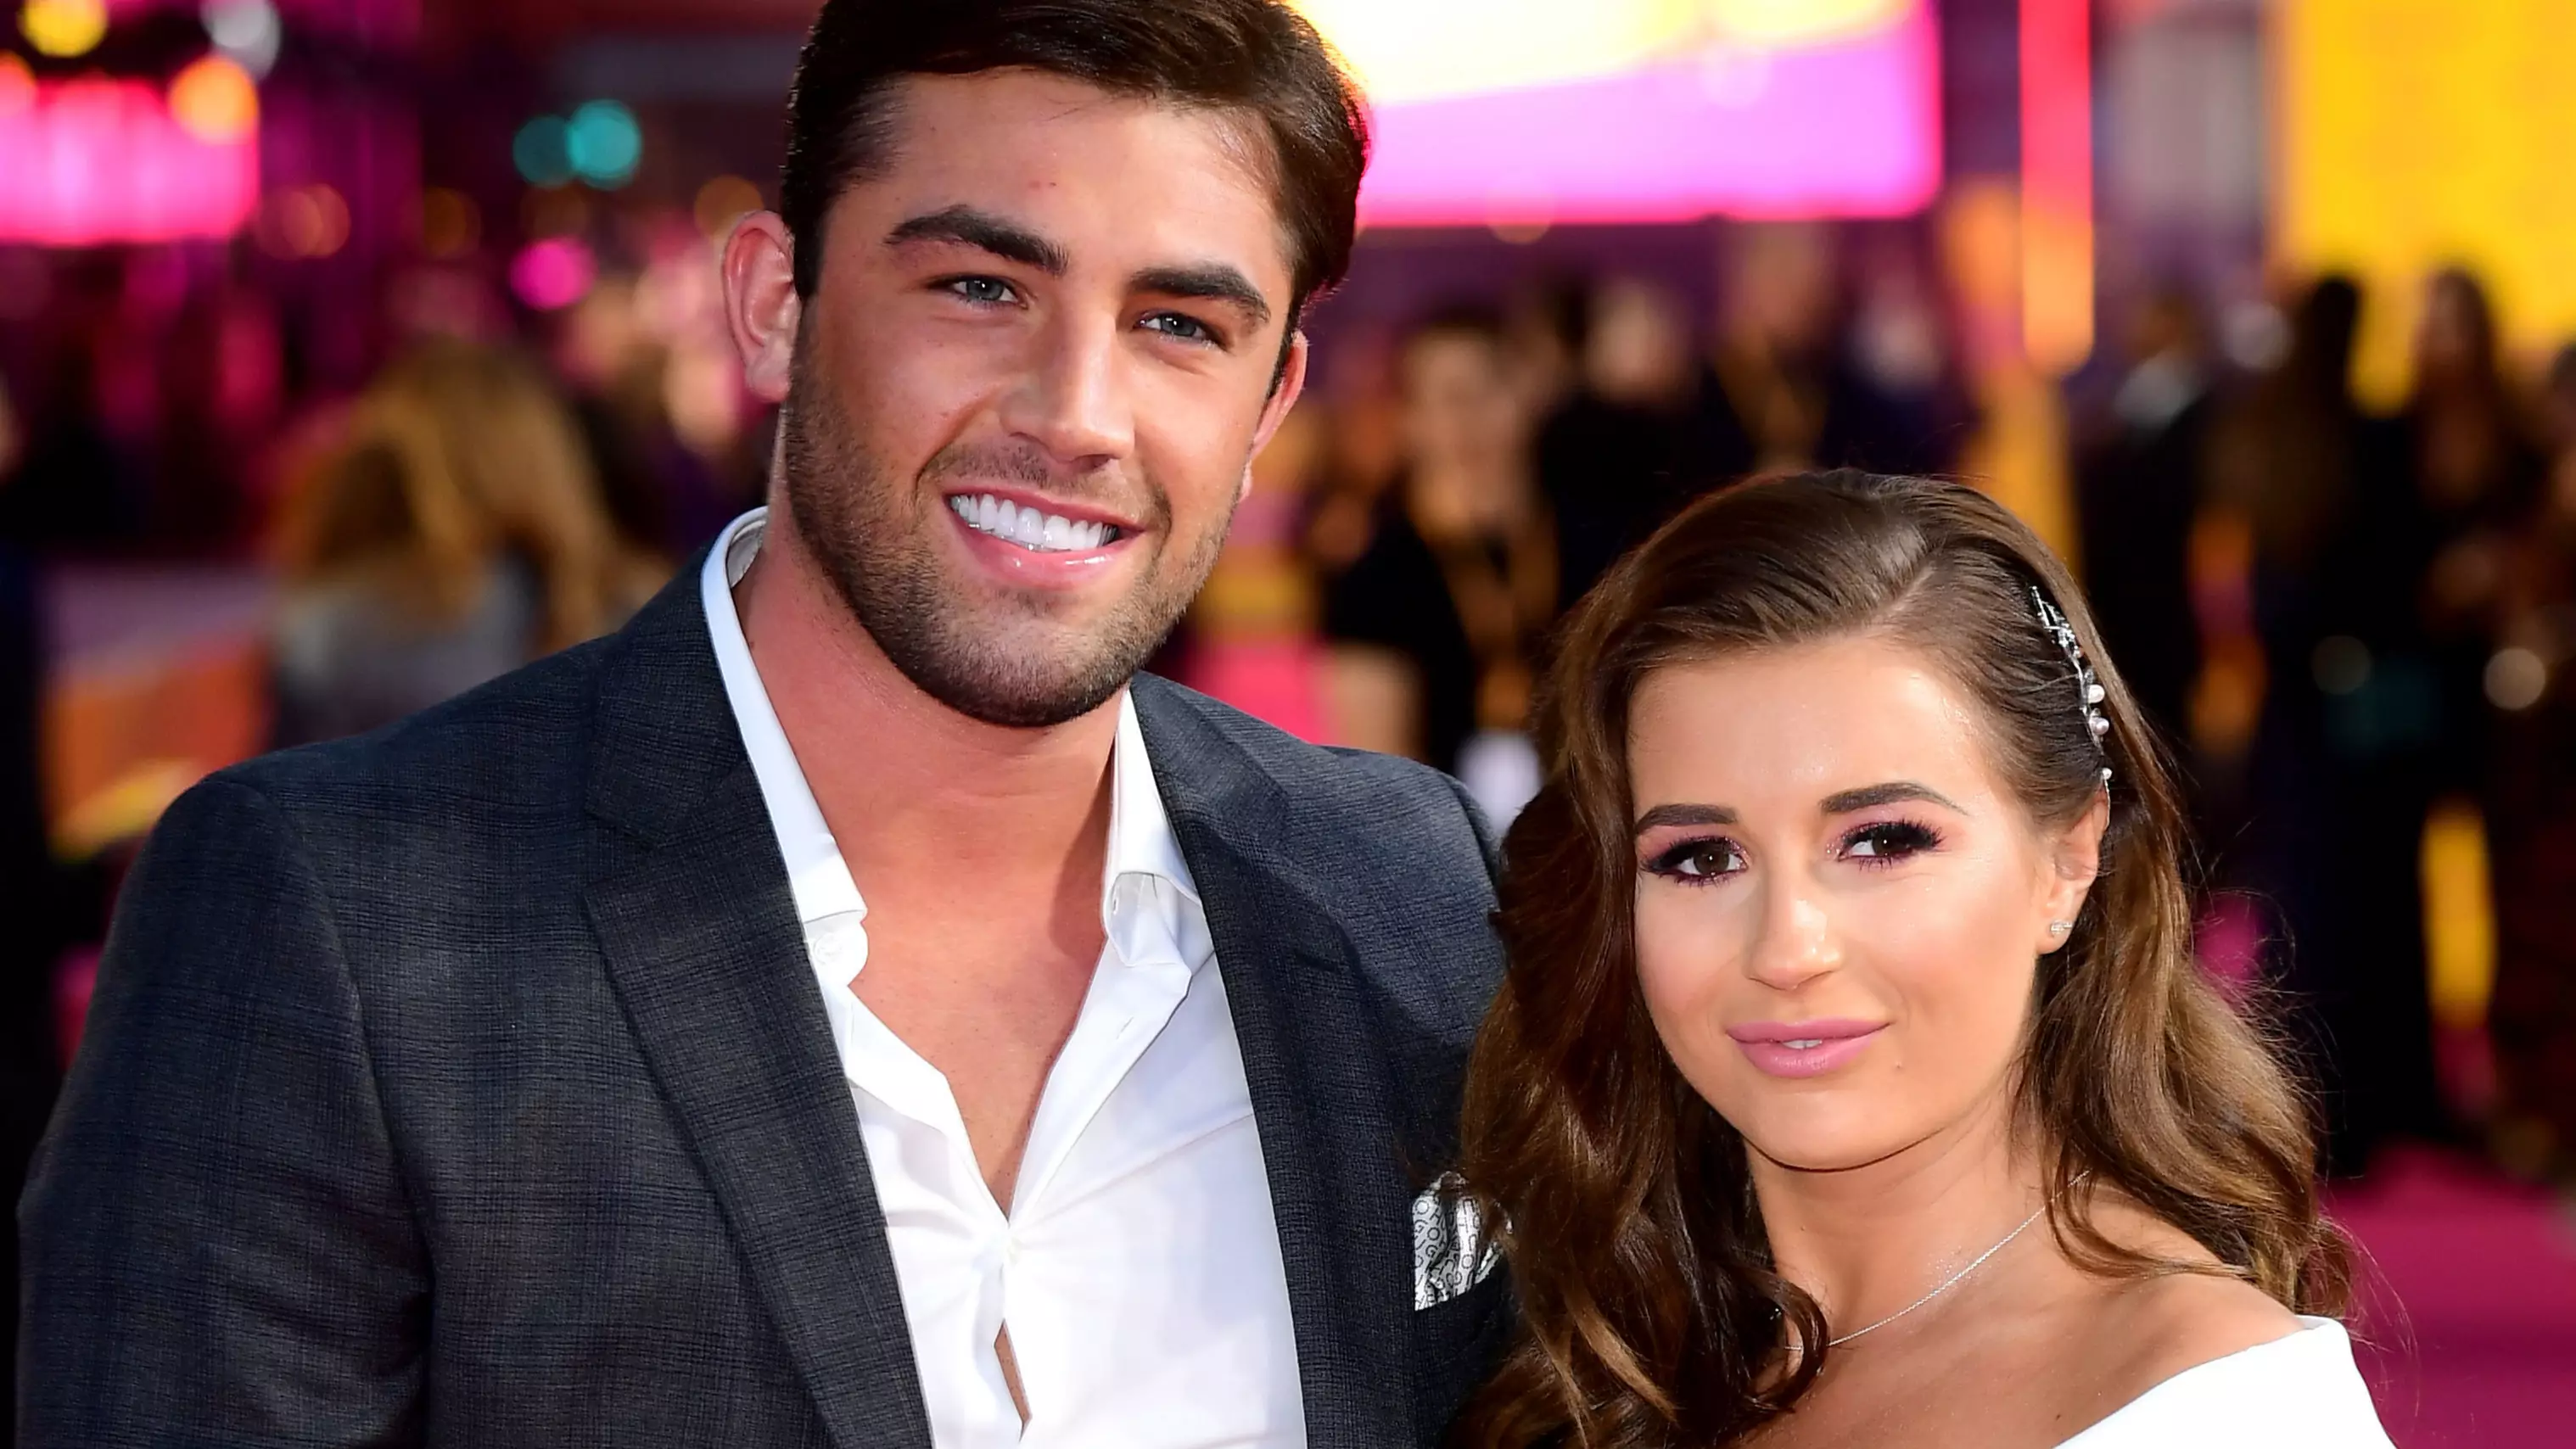 'Love Island’s' Dani Dyer Says She Split From Jack Fincham Due To 'Lack Of Respect'